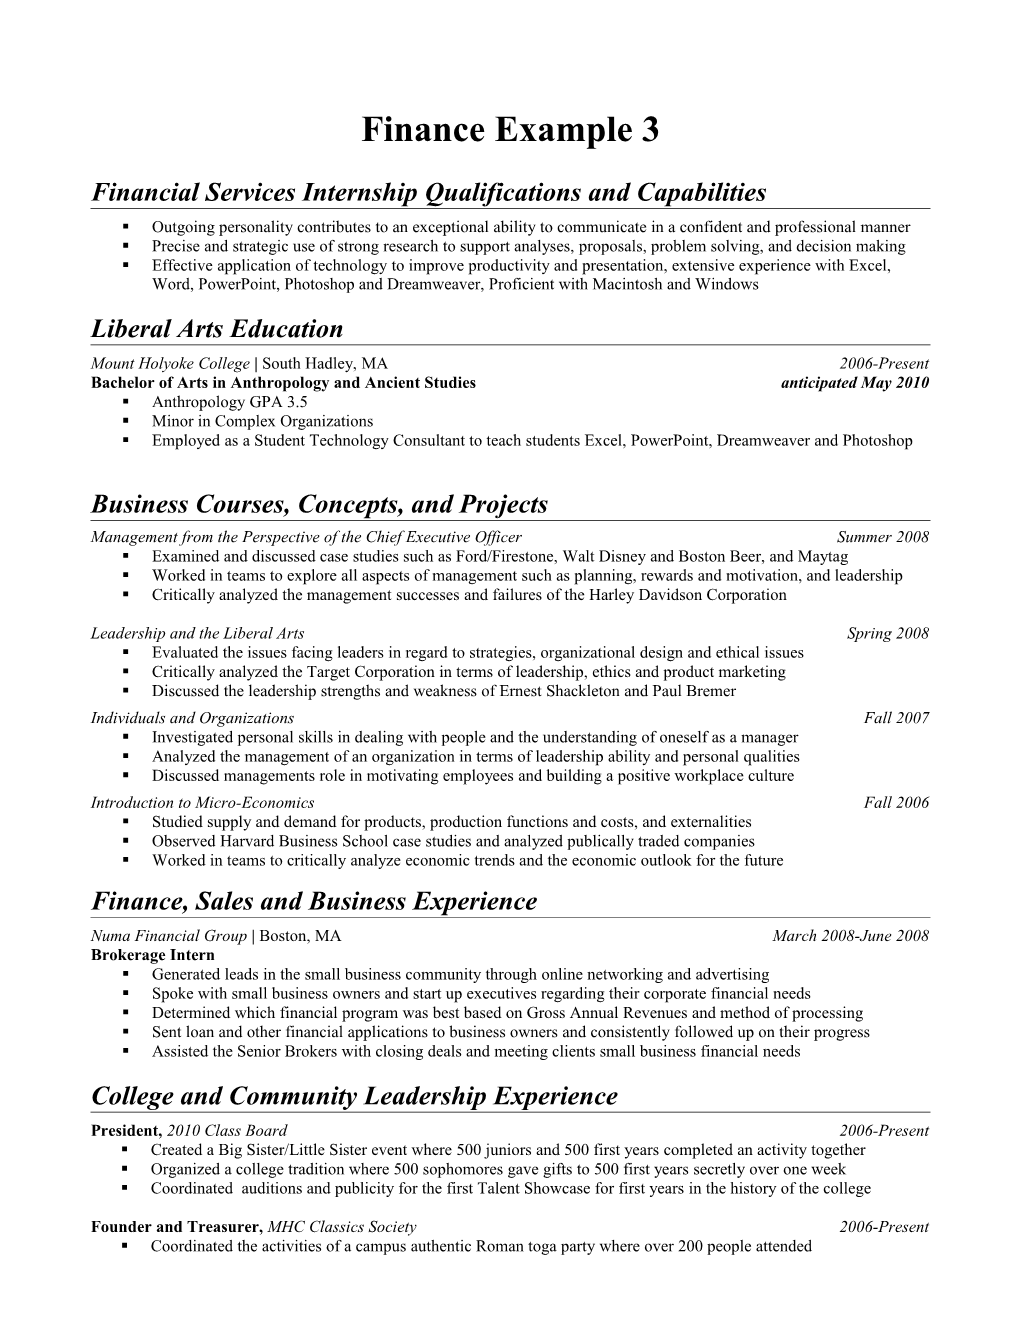 Financial Services Internship Qualifications and Capabilities s1